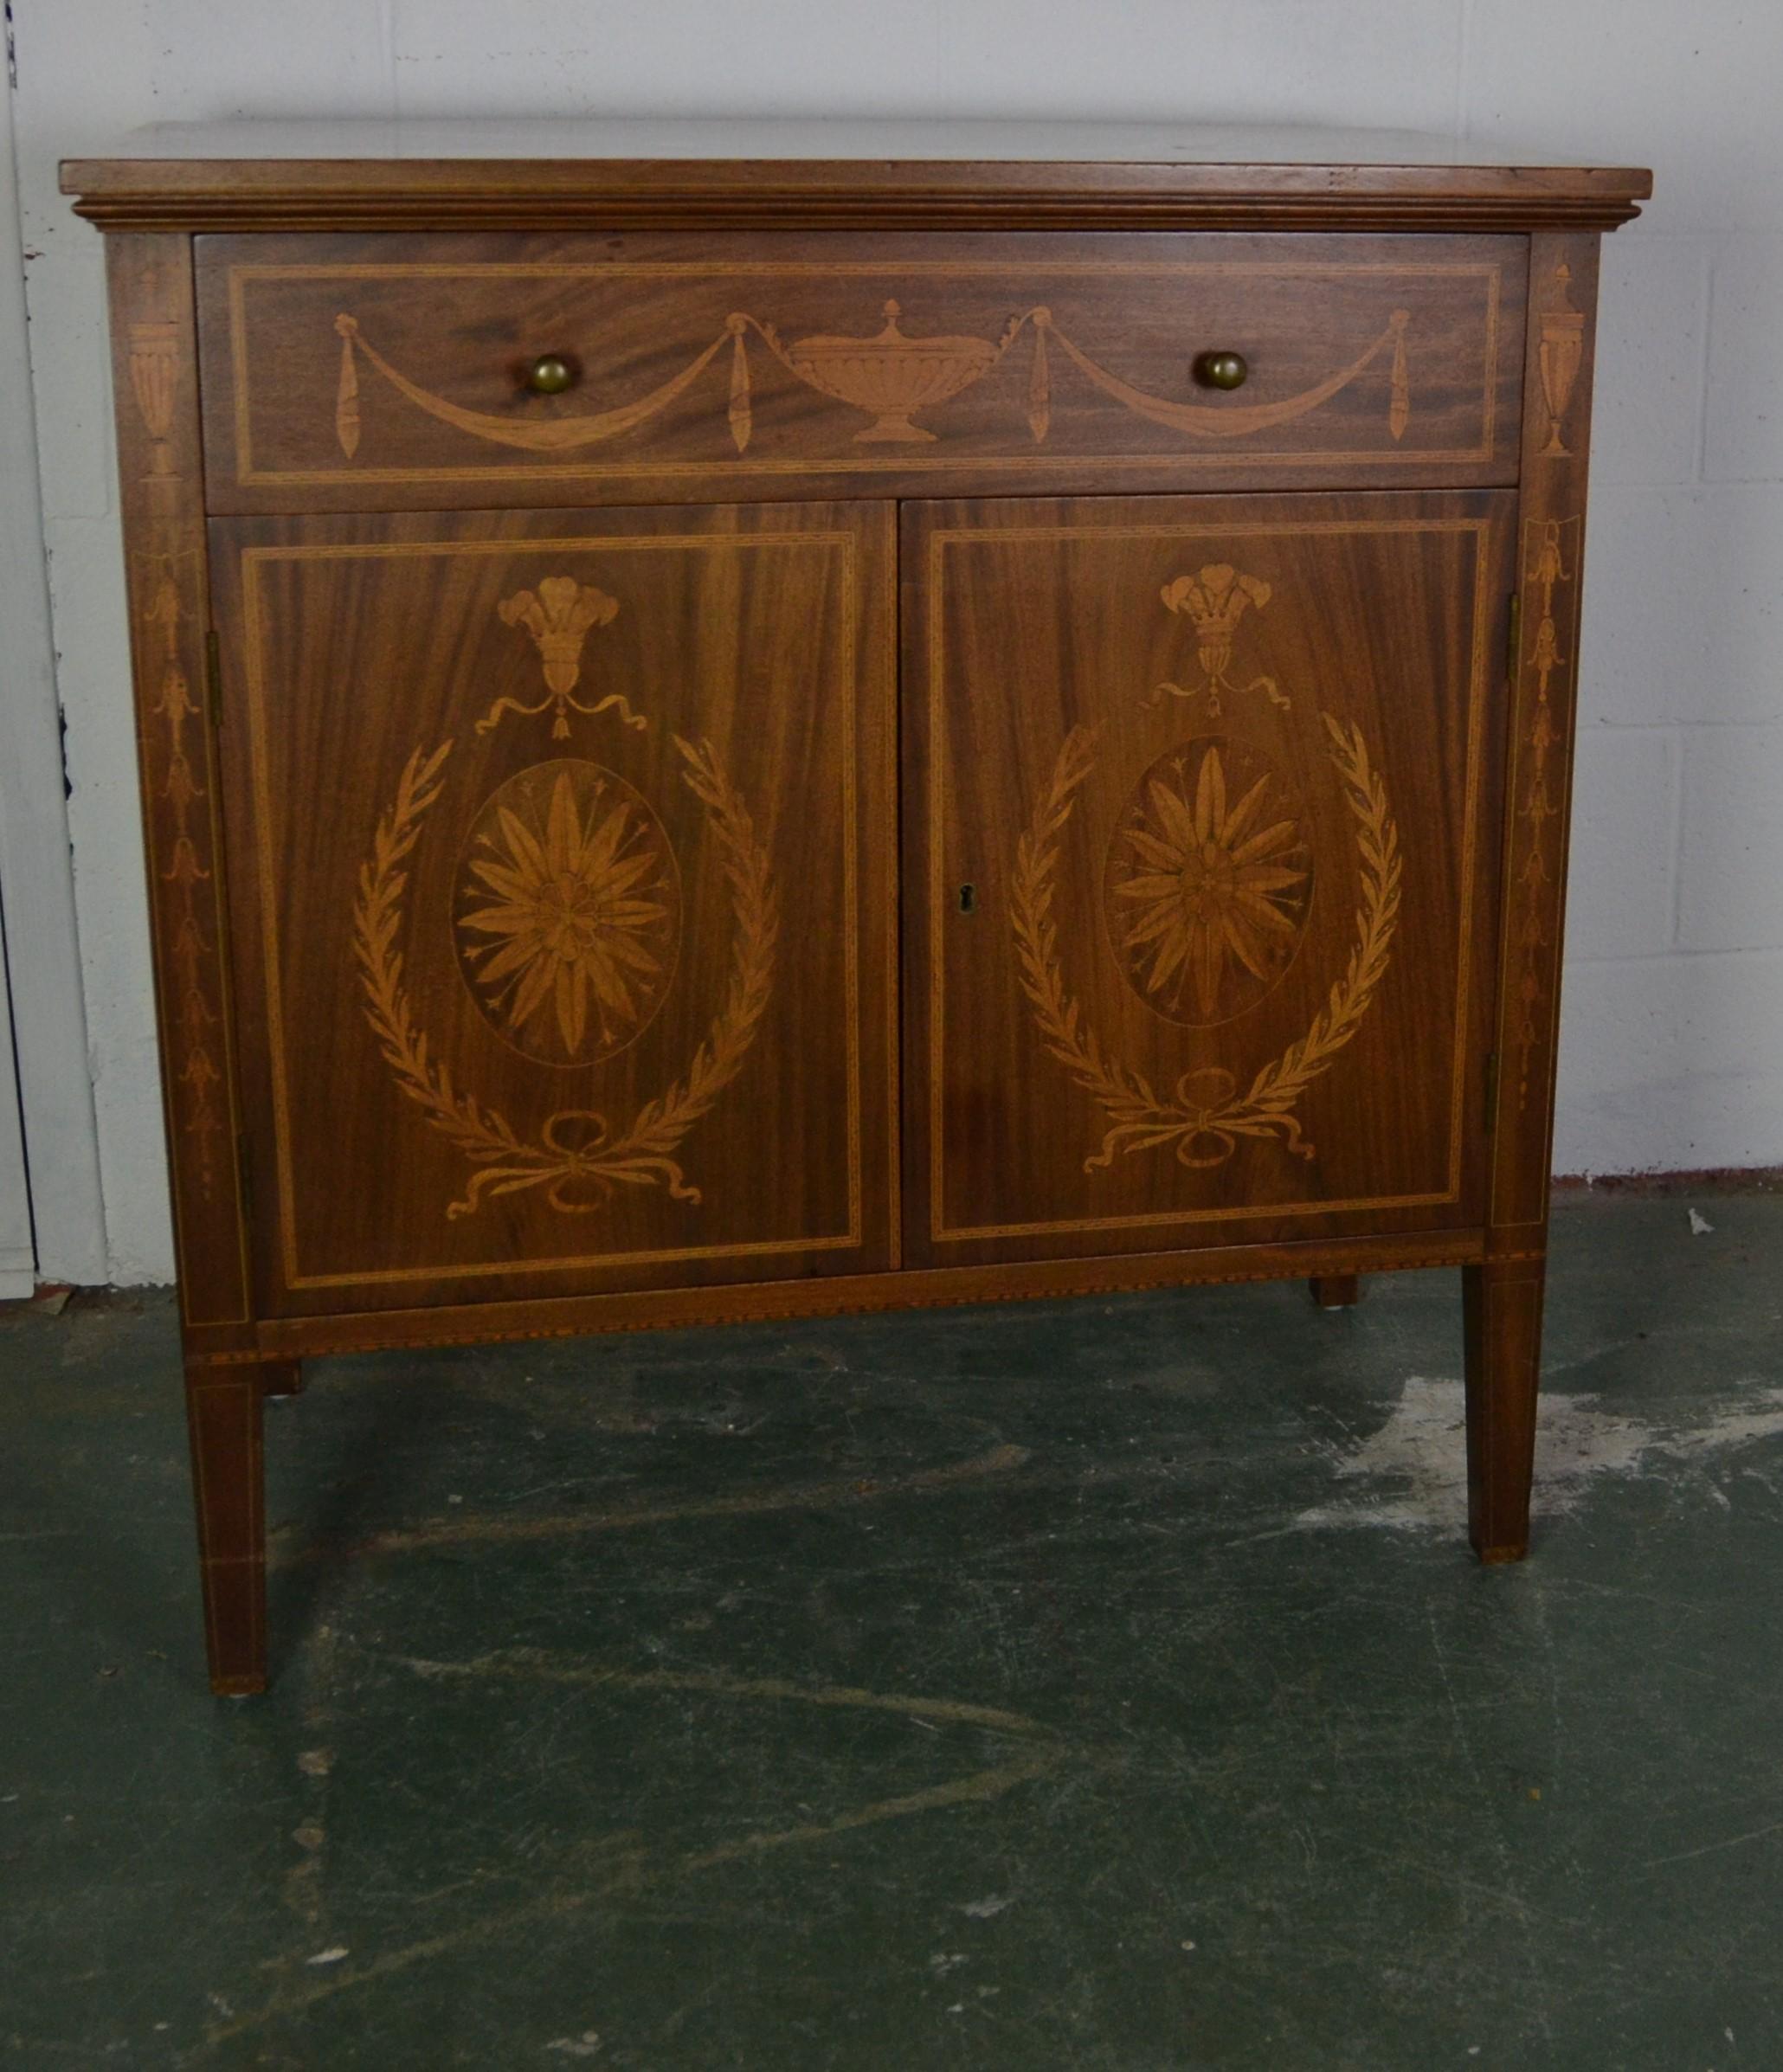 Edwardian style mahogany cabinet by Potthast Brothers. The single drawer and the two front doors have wood inlay. It comes with a key.